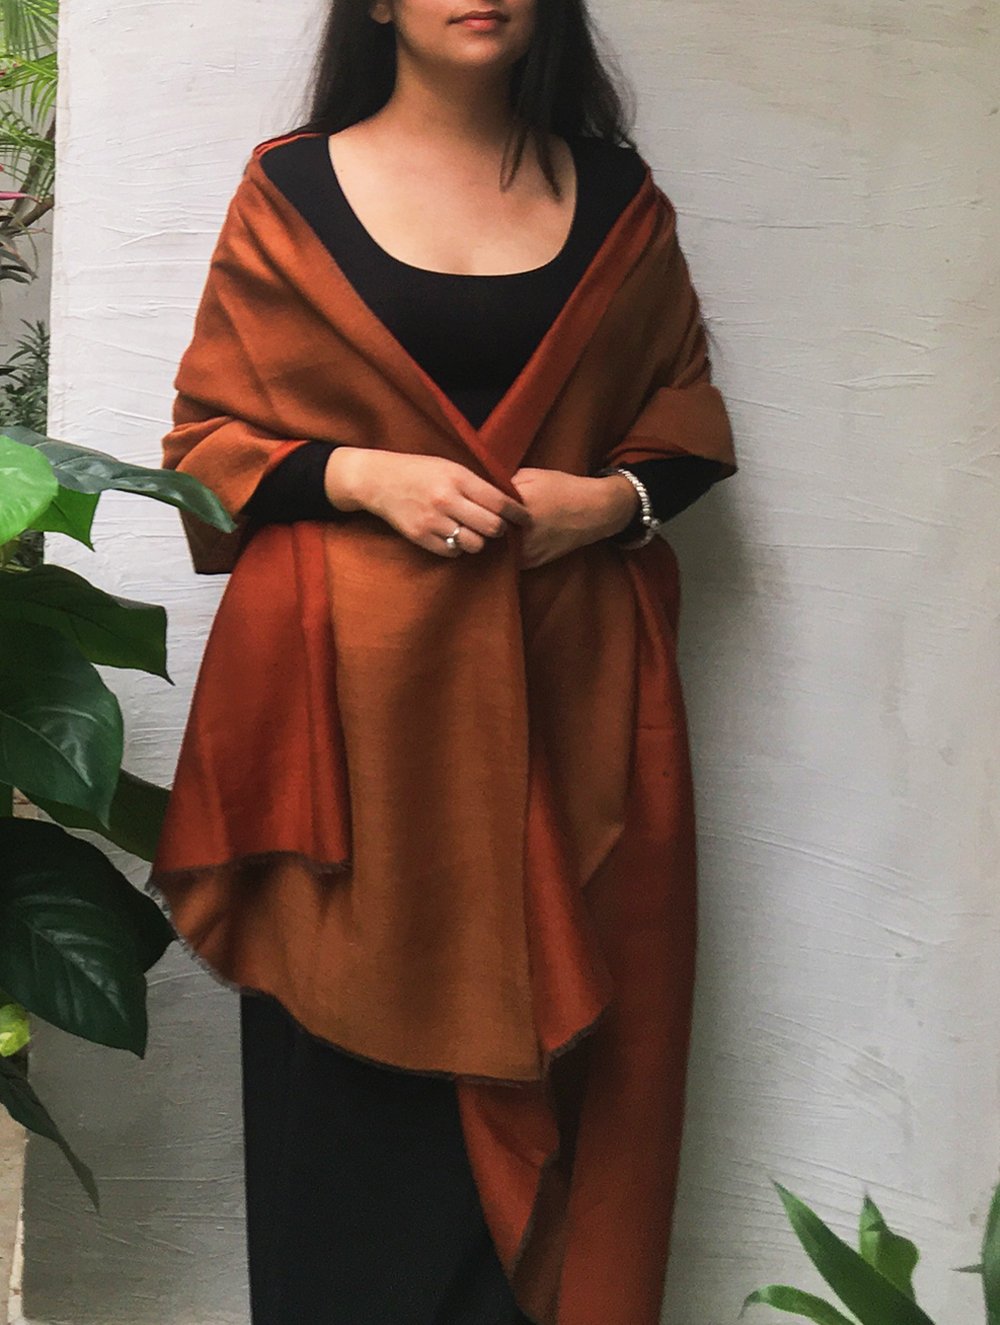 Load image into Gallery viewer, Warm Kashmiri Reversible Wool Stole - Rust &amp; Brown